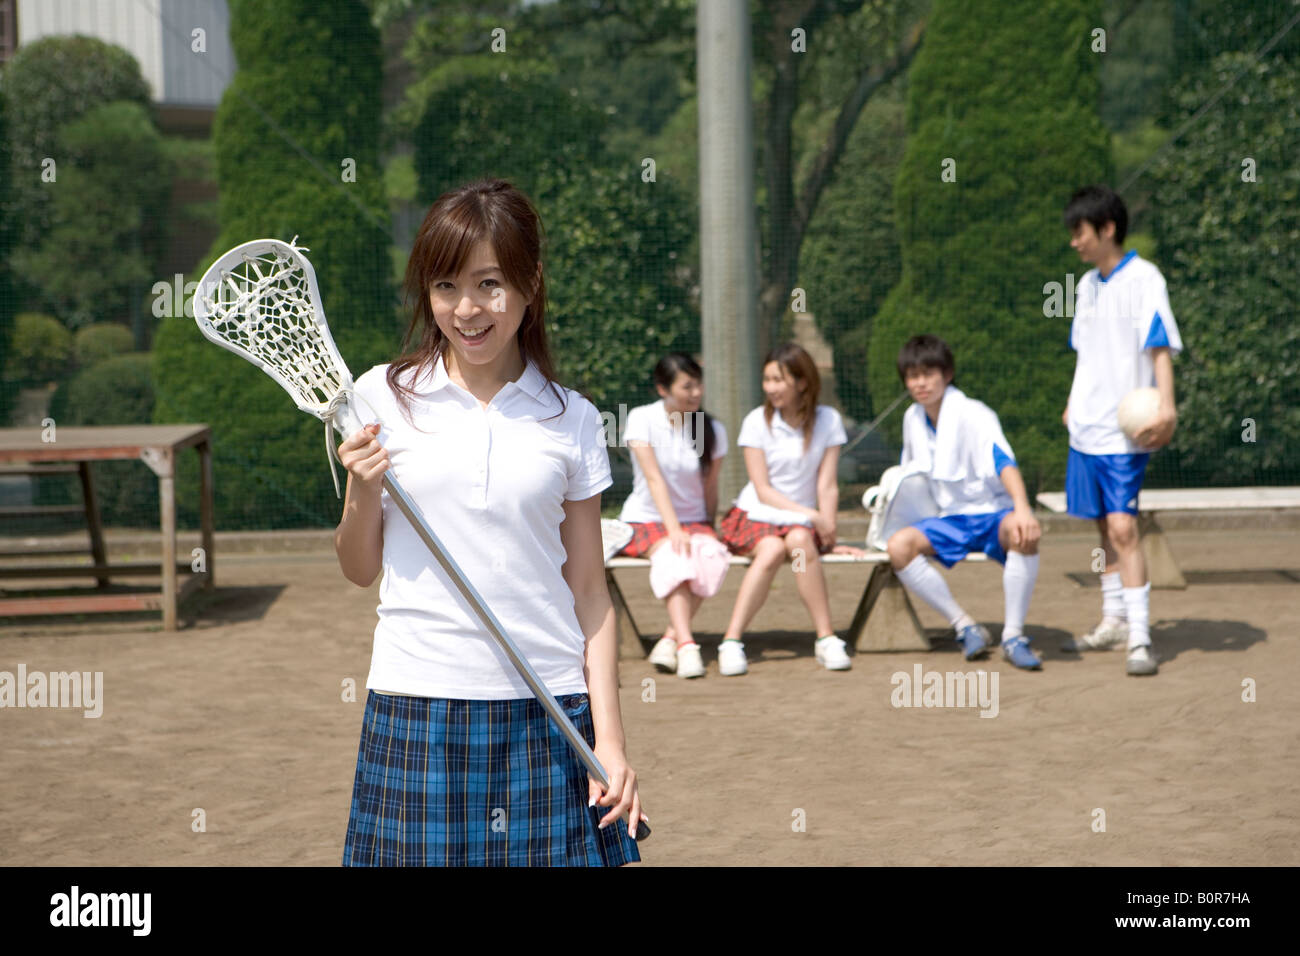 Teenage girl standing and holding lacrosse stick with friends sitting on bench in background, portrait Stock Photo